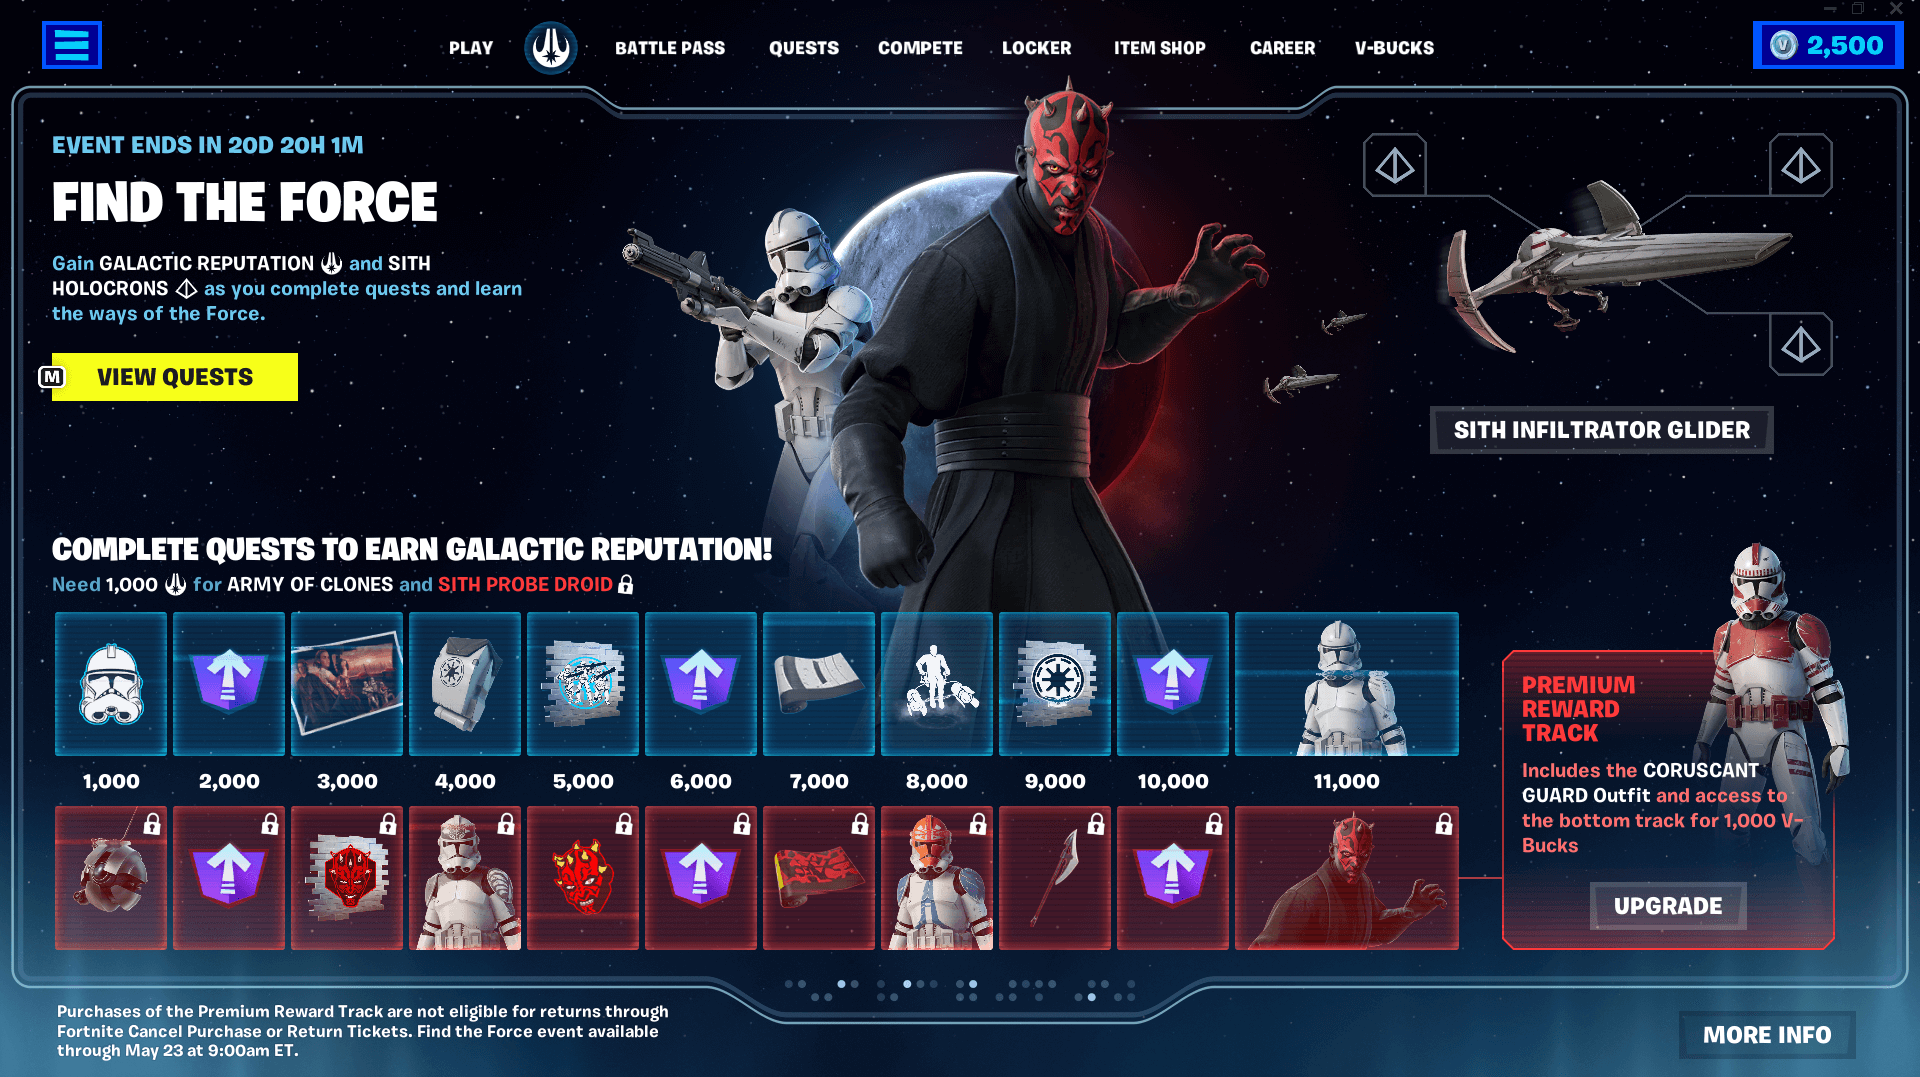 The cosmetic and level-up rewards of Find the Force.